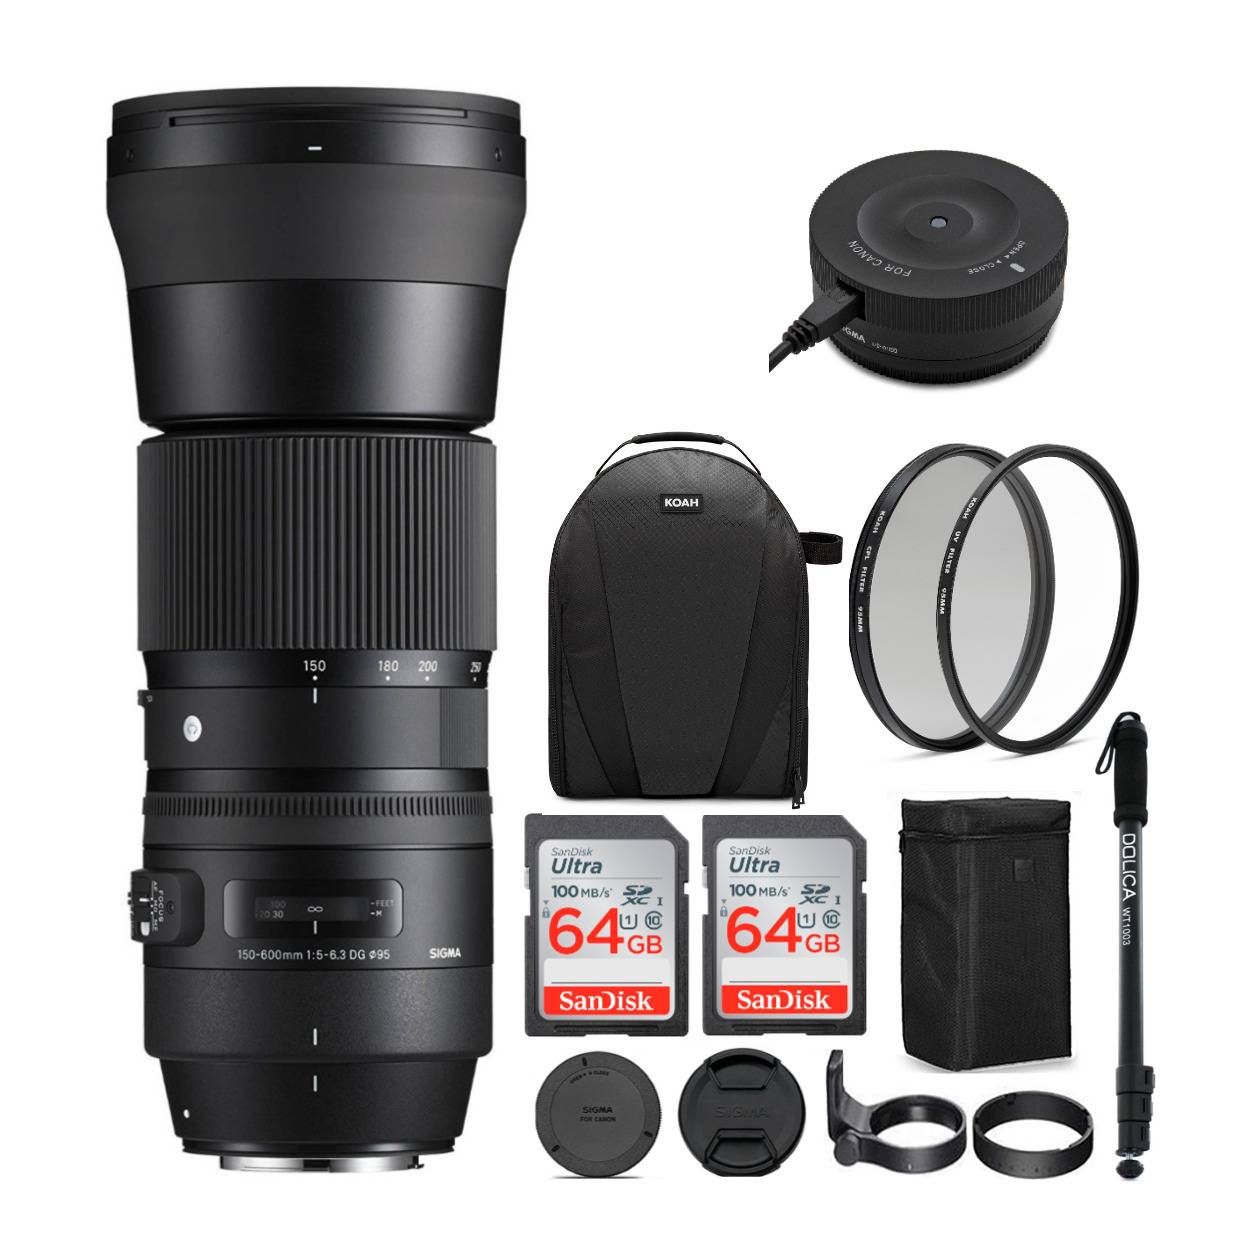 Sigma 150-600mm f/5-6.3 DG OS HSM Lens for Canon with USB Dock Bundle